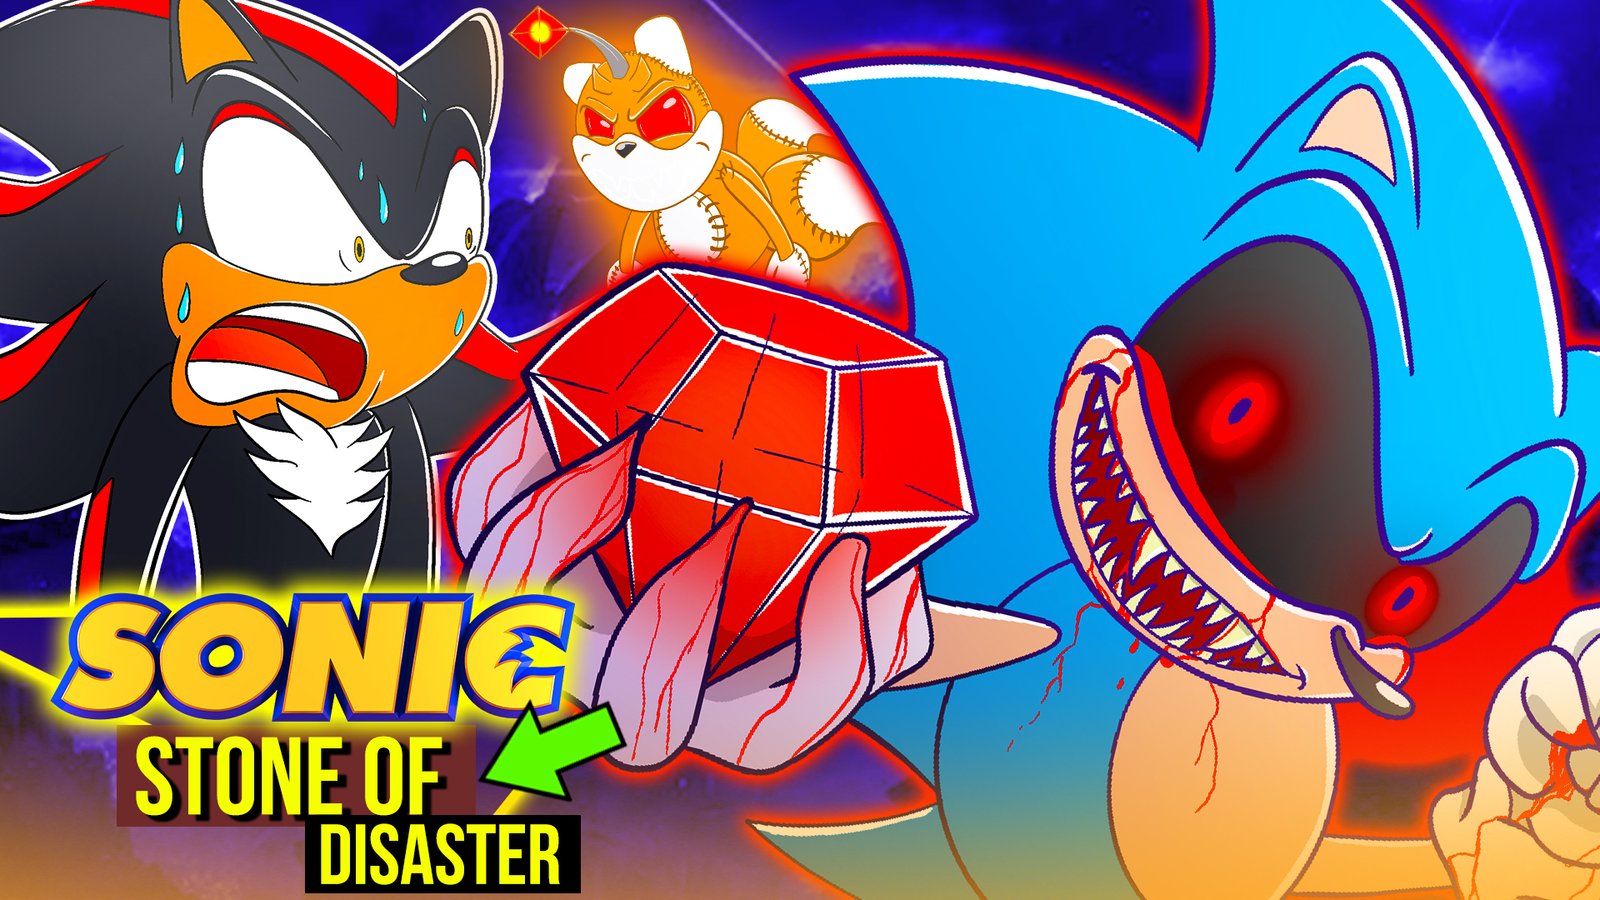 SONIC Stone of Disaster